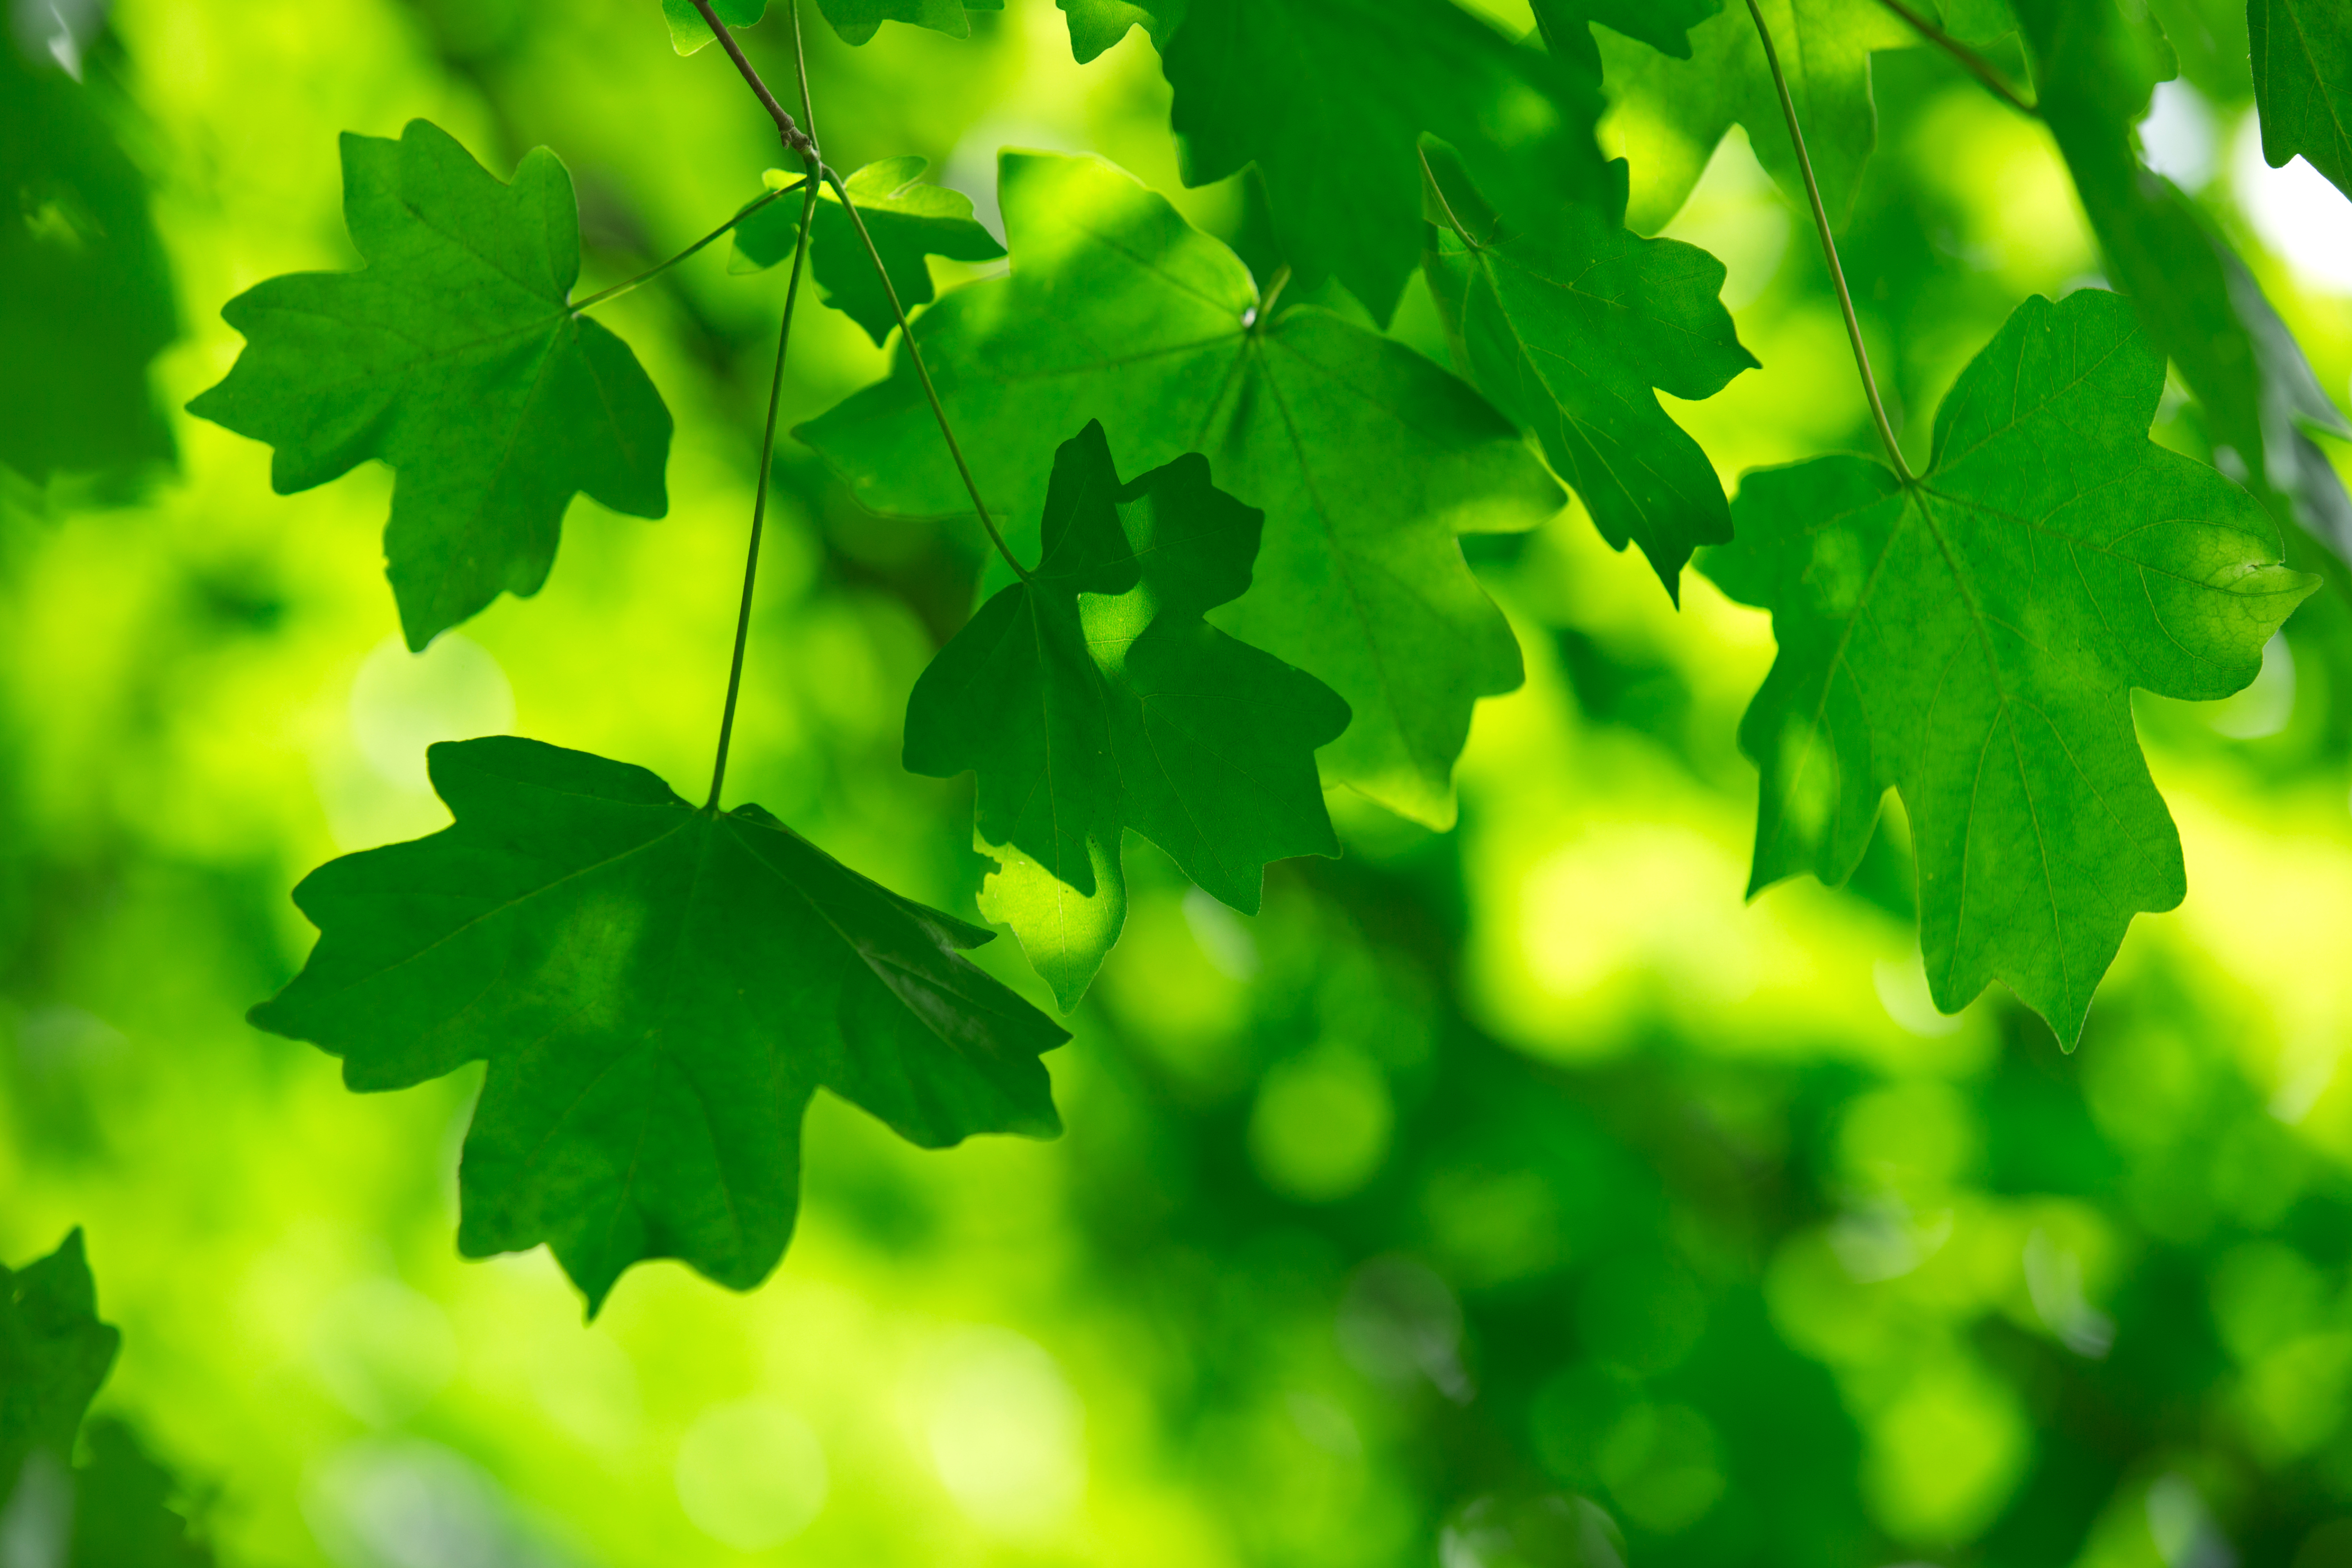 Why We Love The Color Green: It's The Color Of New Life